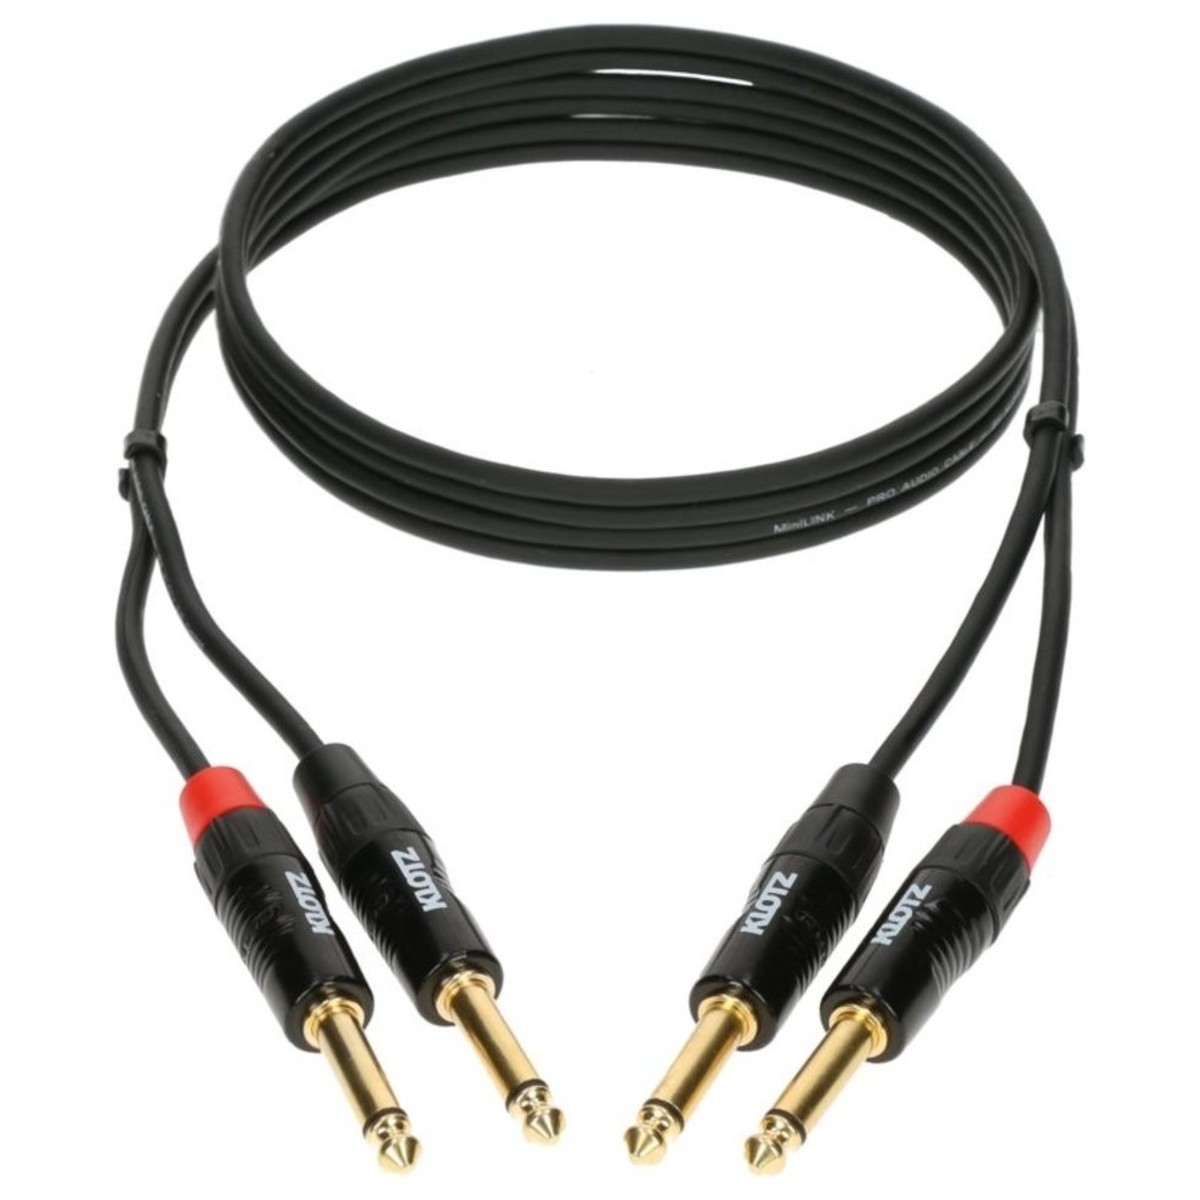 An image of Klotz MiniLink Pro Stereo 1/4 Jack Cable 90cm | PMT Online